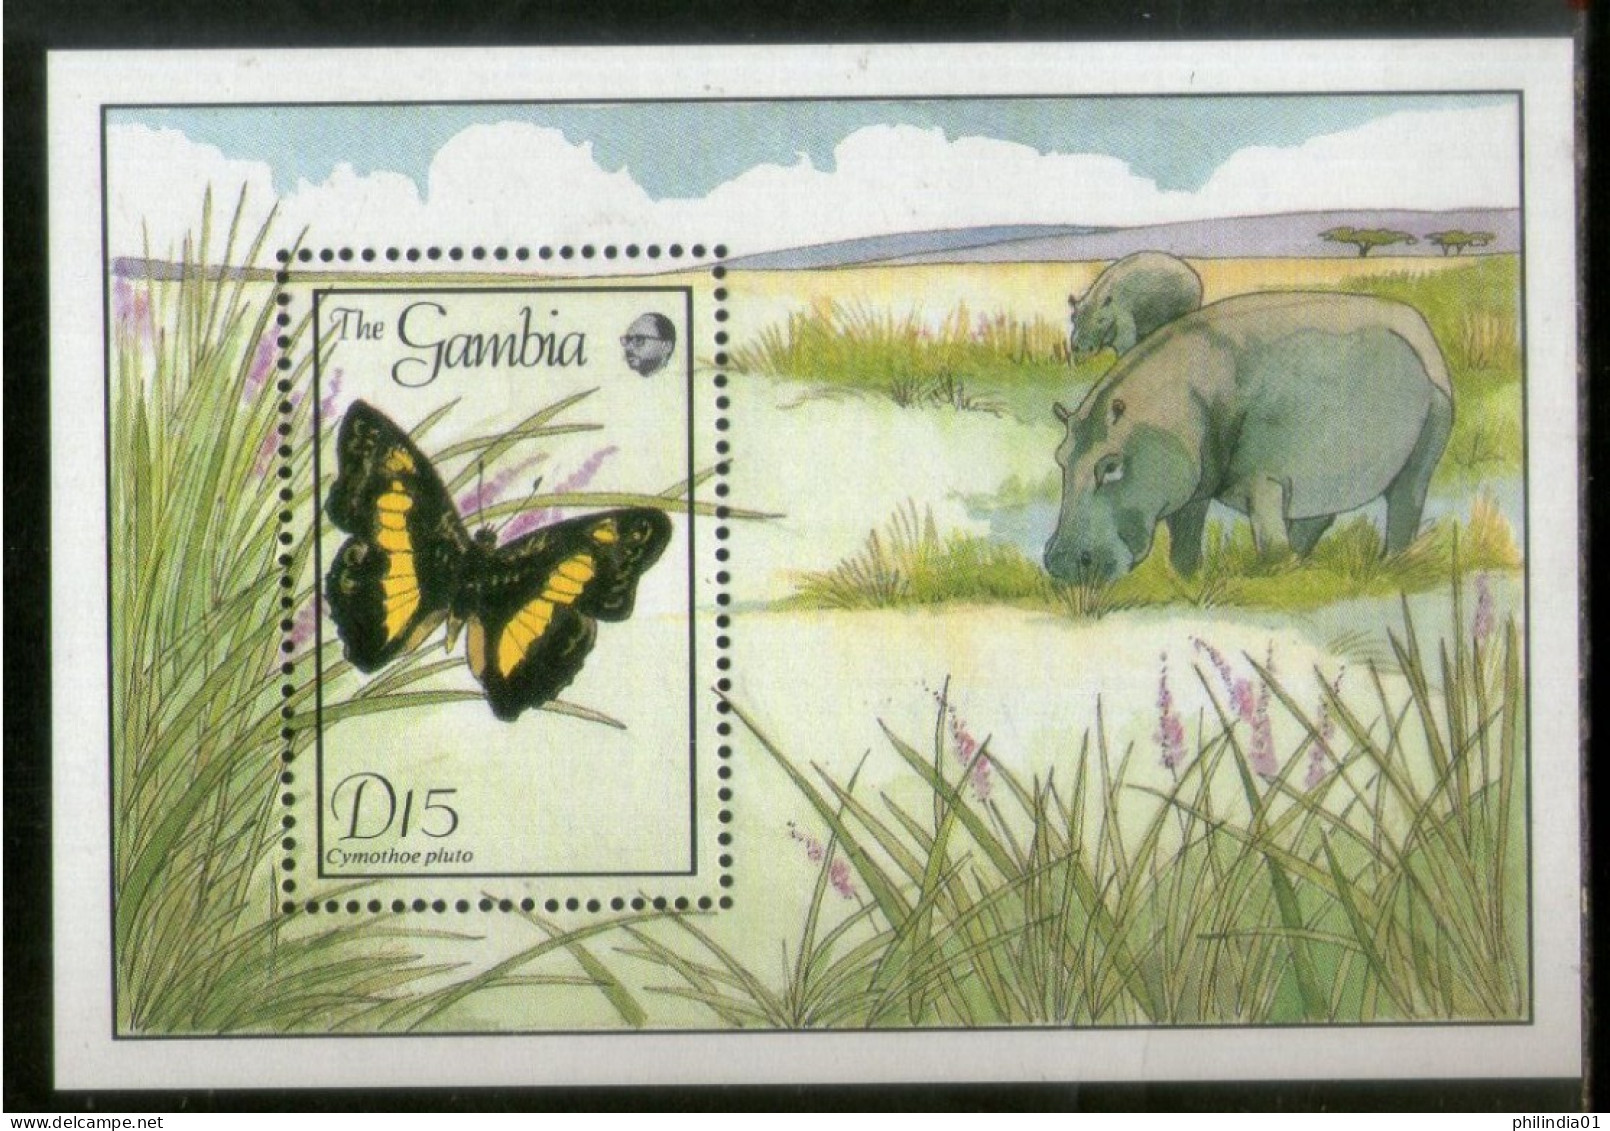 Gambia 1989 Butterflies Moth Insect Hippo Wildlife Animals Sc 845 M/s MNH # 1584 - Farfalle